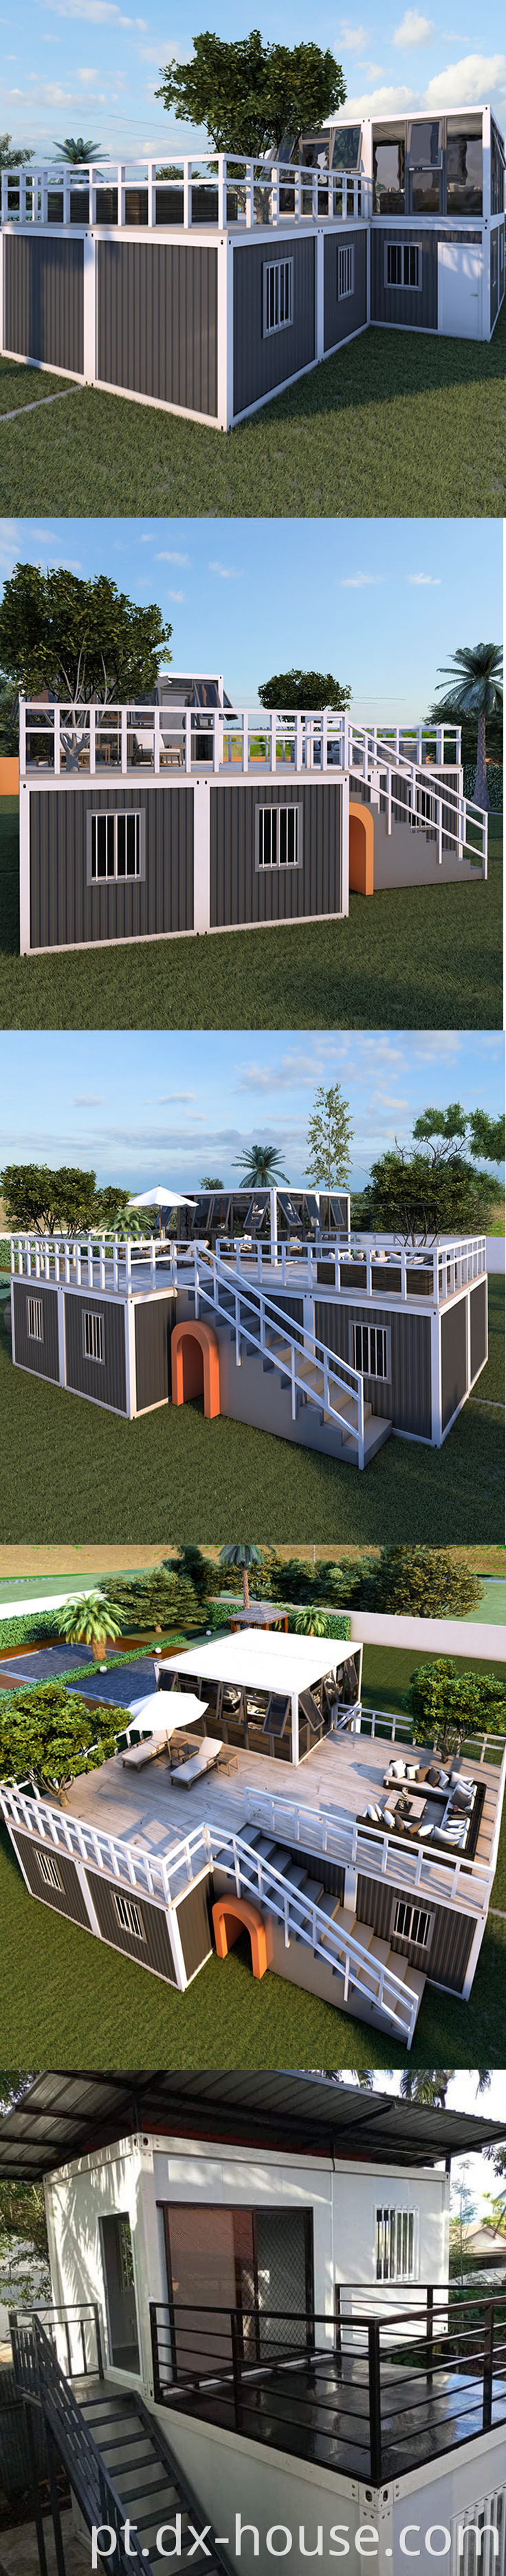 shipping container floor plans